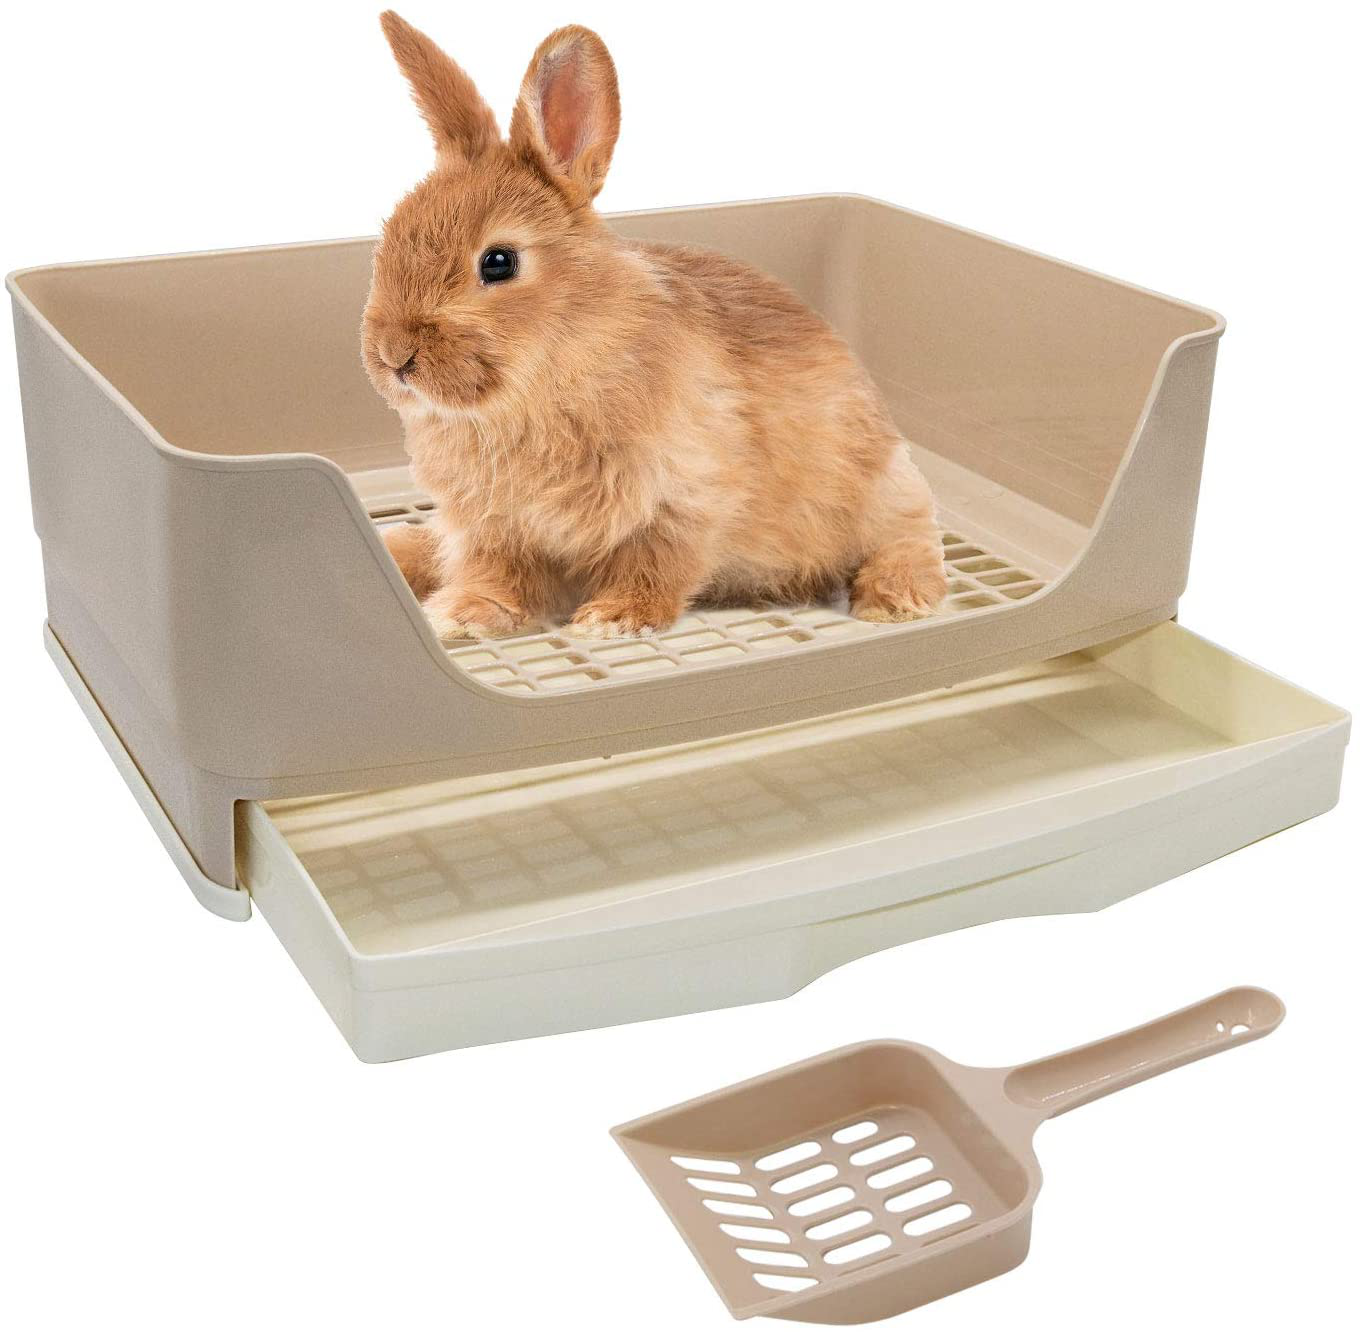 BWOGUE Large Rabbit Litter Box Toilet,Potty Trainer Corner Litter Bedding Box with Drawer Larger Pet Pan for Adult Guinea Pigs, Rabbits, Hamster, Chinchilla, Ferret, Galesaur, Small Animals